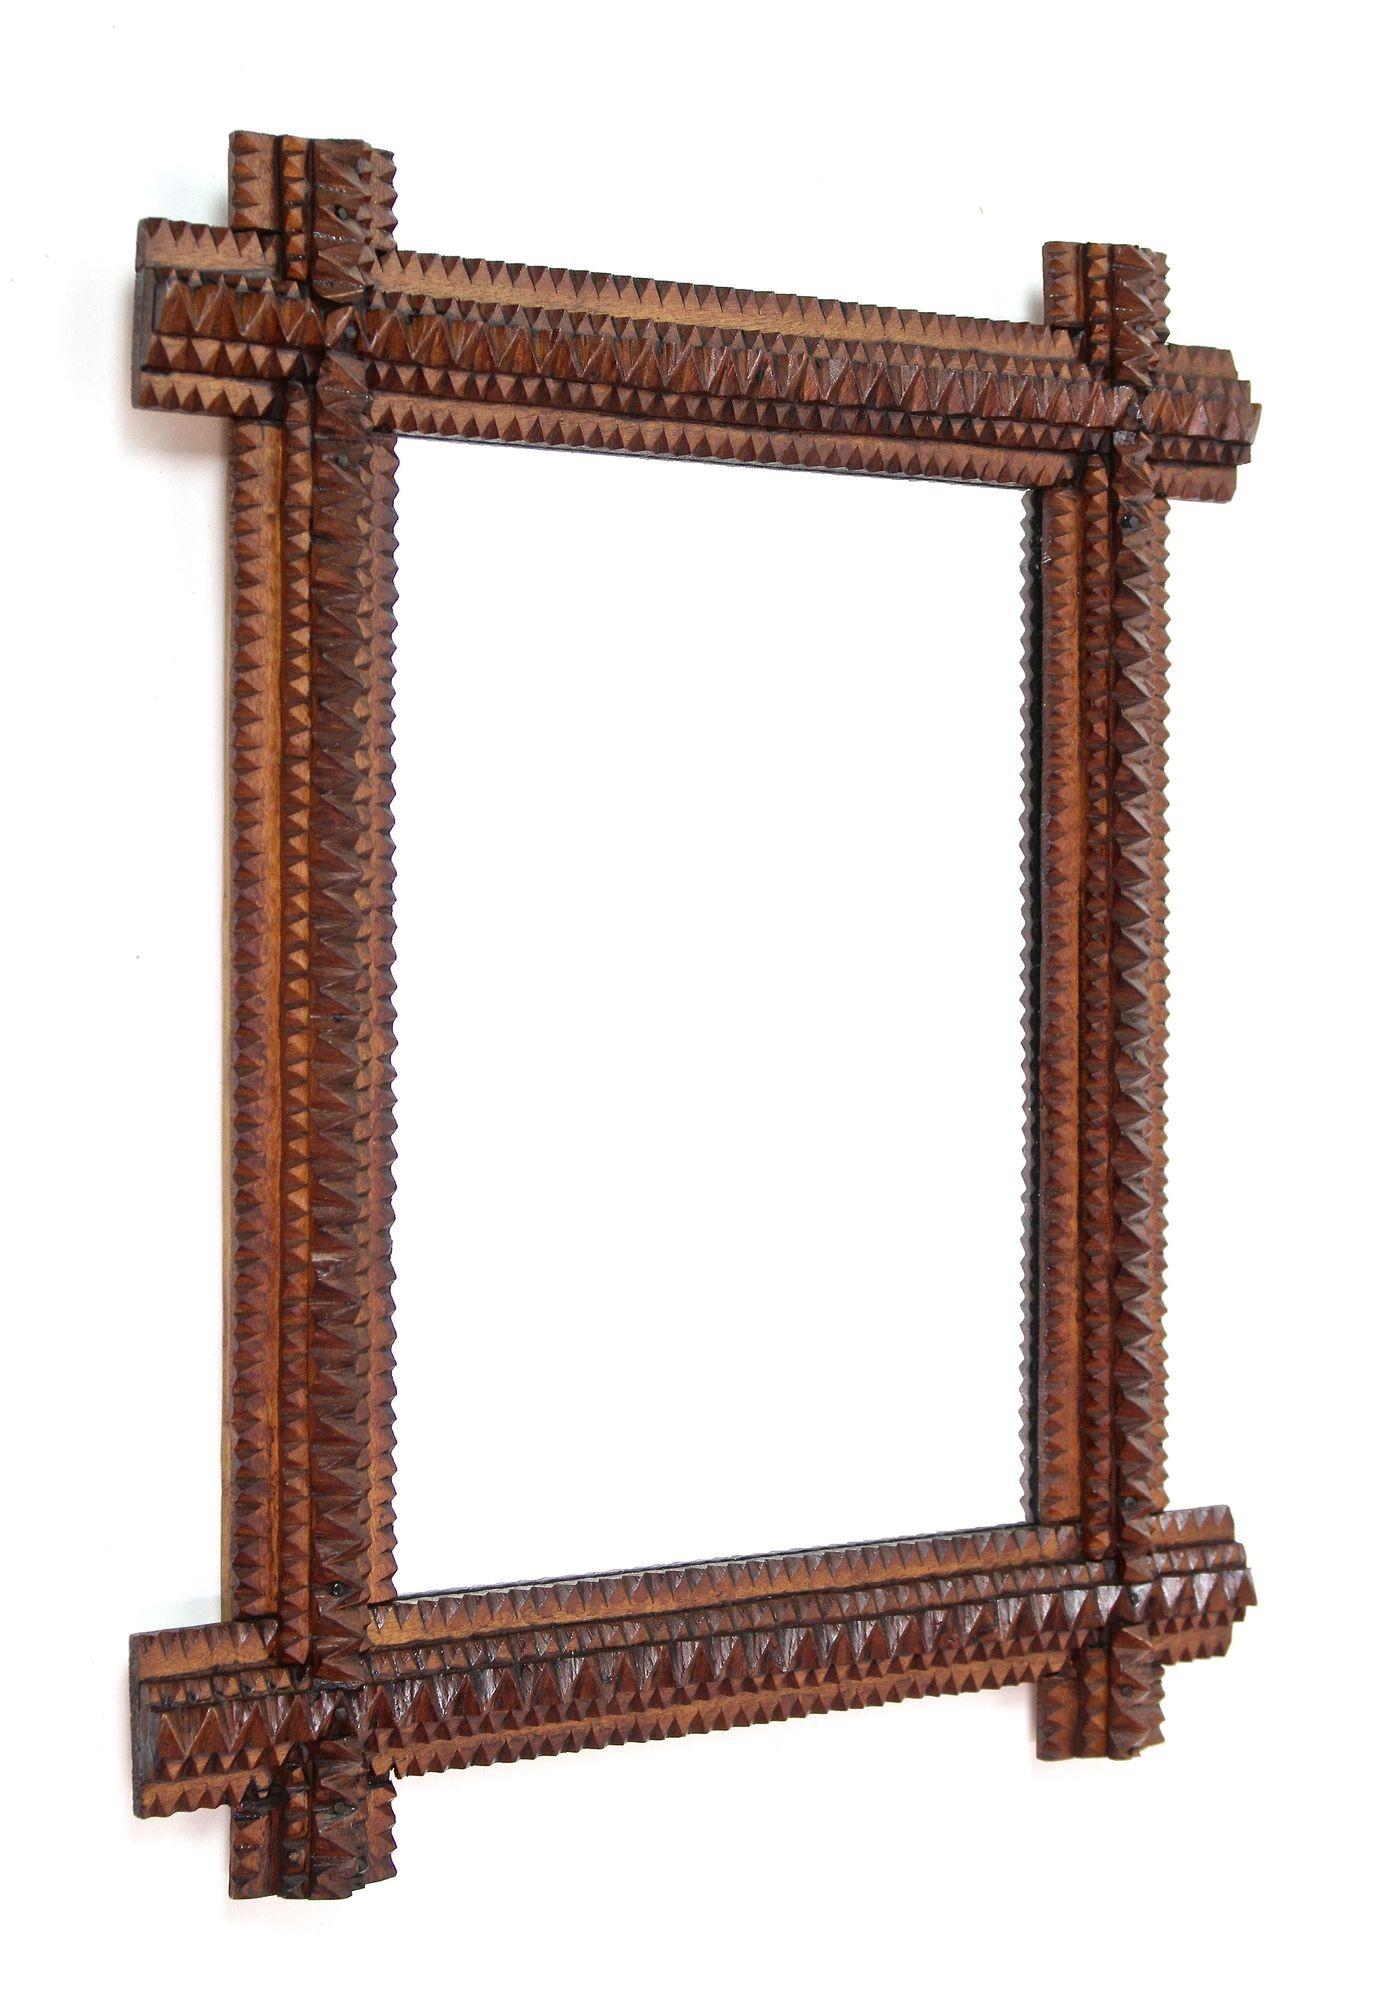 Extraordinary rustic Tramp Art mirror from the period around 1880 in Austria. Elabortely hand-carved out of basswood, this lovely small wall mirror convinces with its great looking variety of different carving techniques. Slightly protruding corners